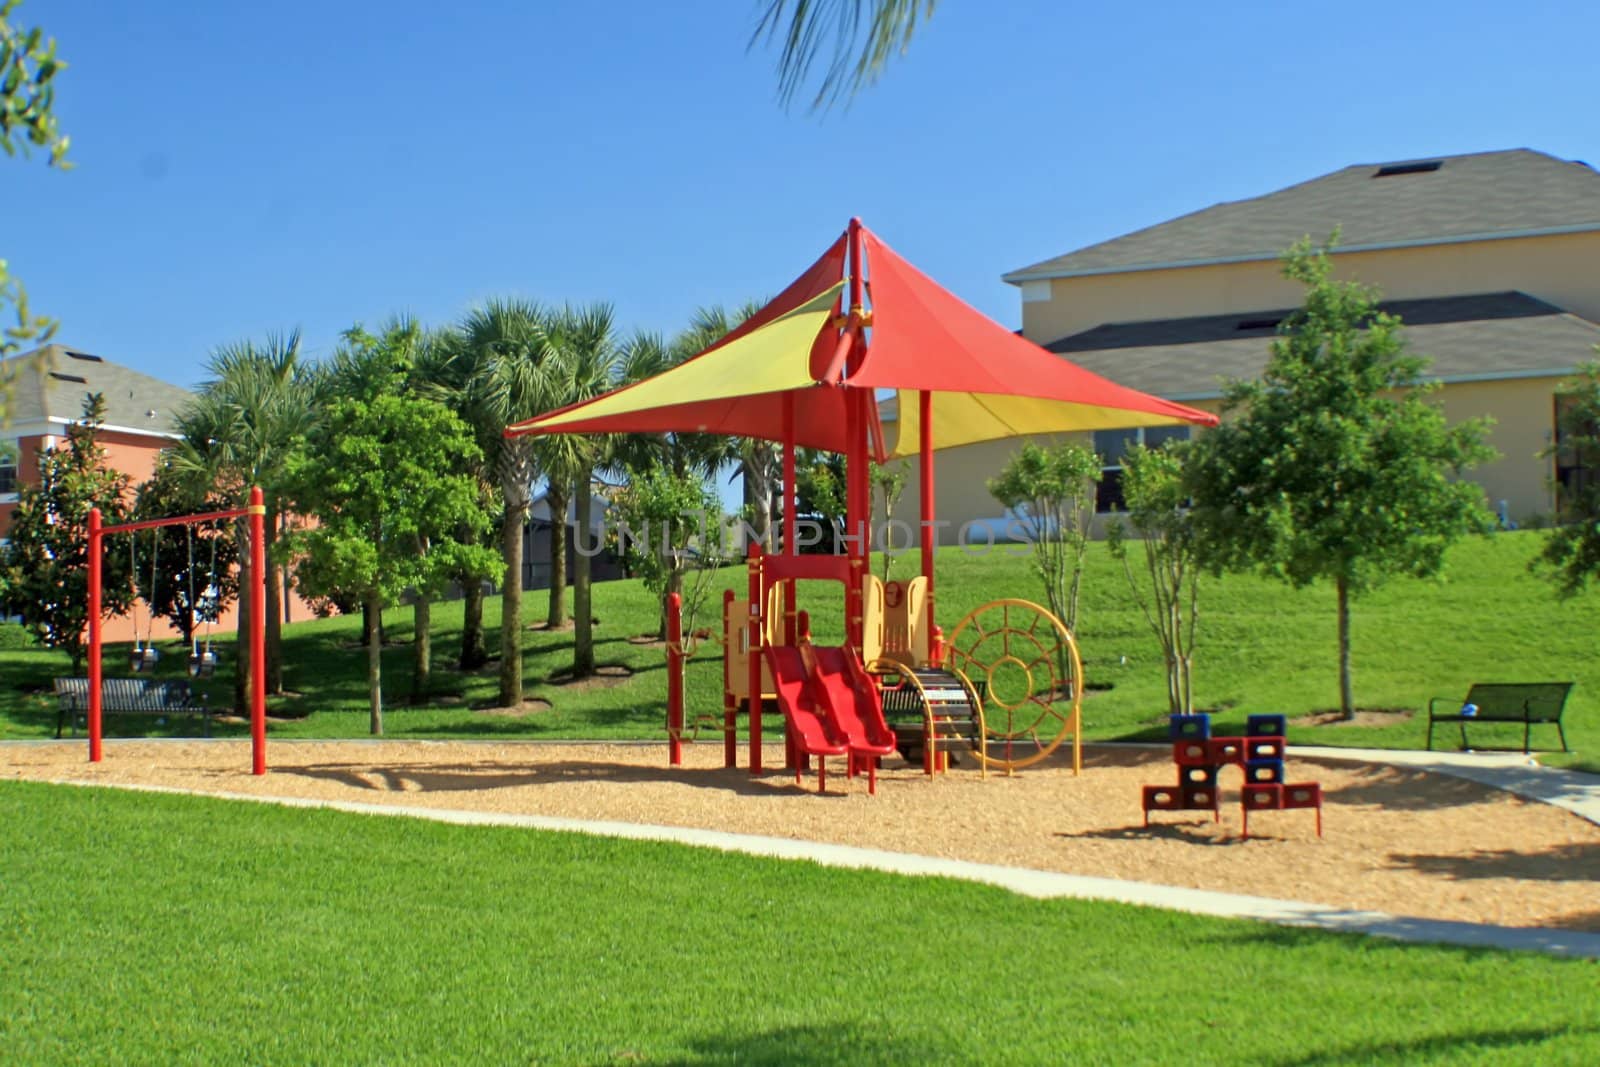 A Playground in a community in Florida